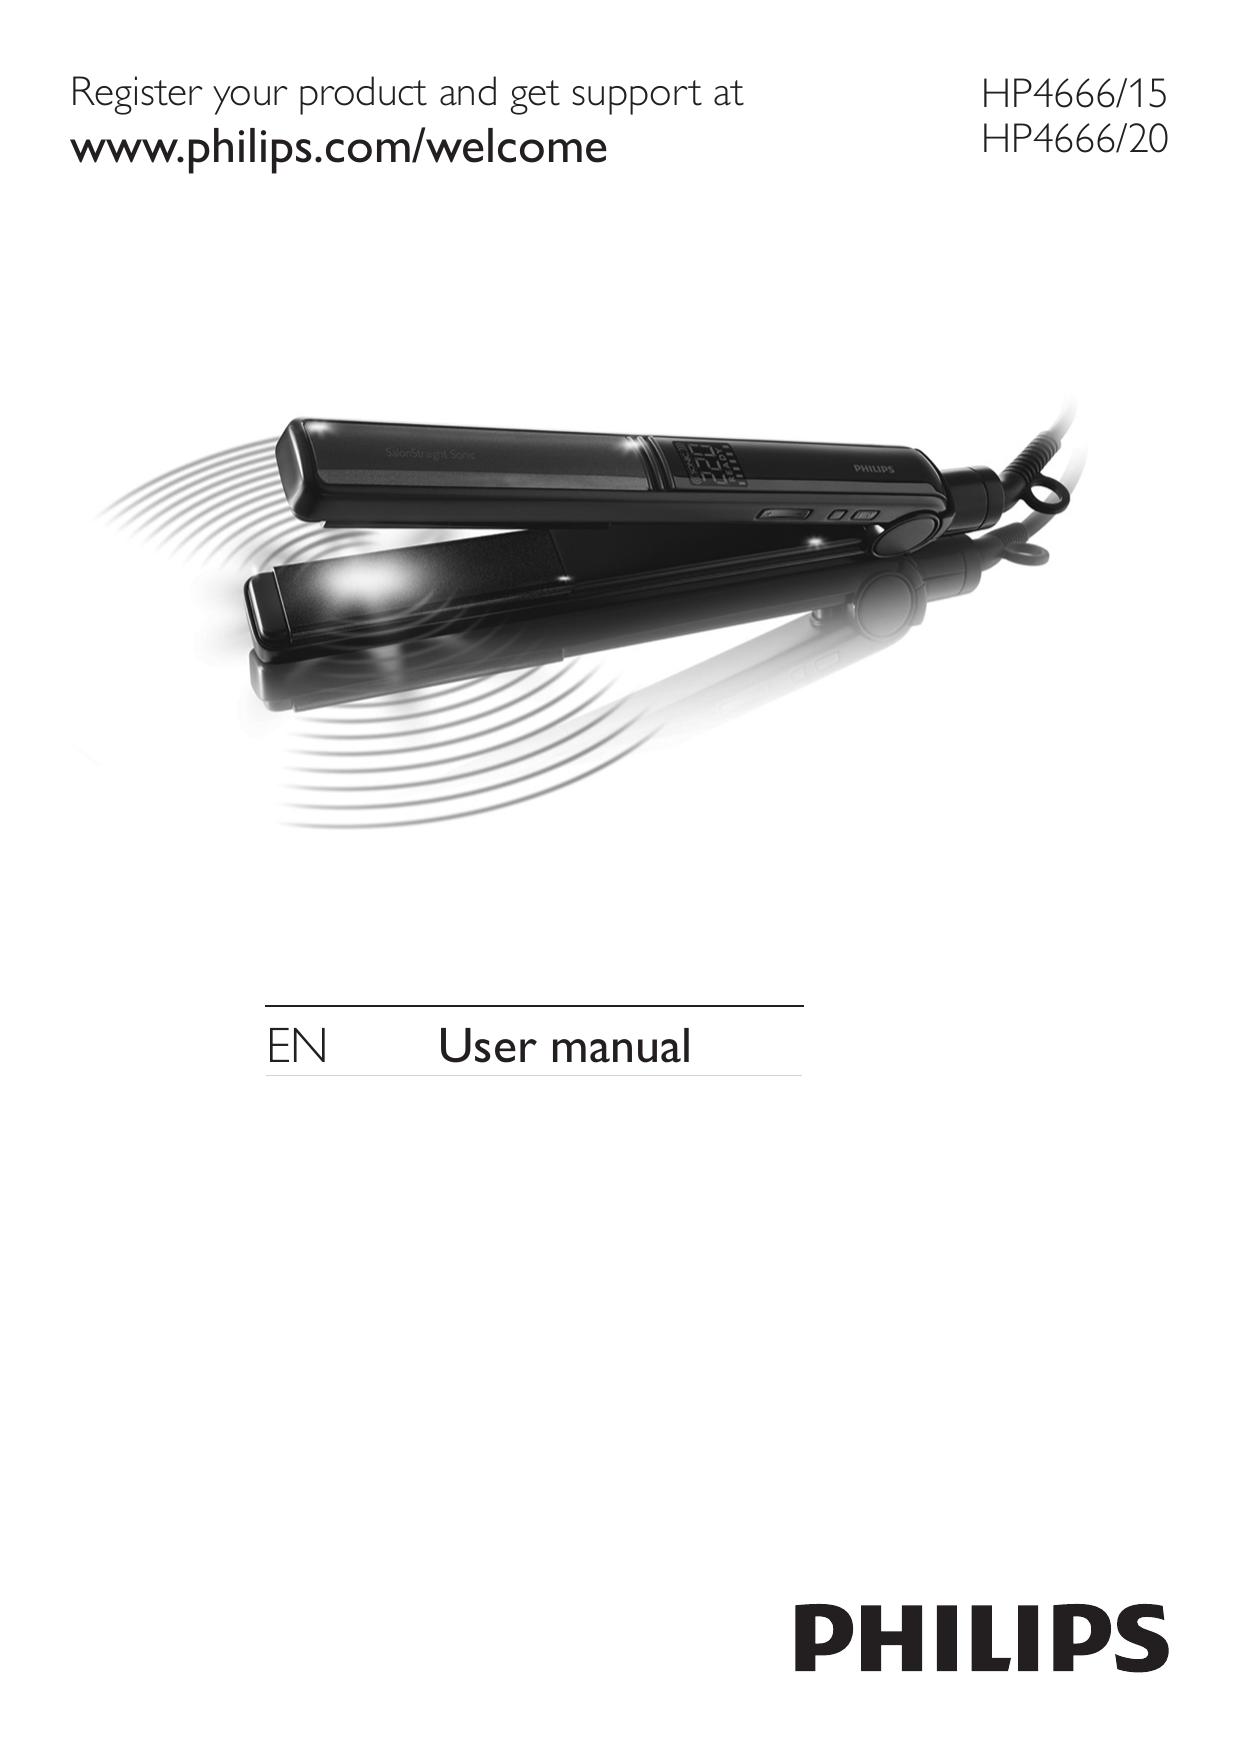 Philips HP4666/15 Hair Care Product User Manual